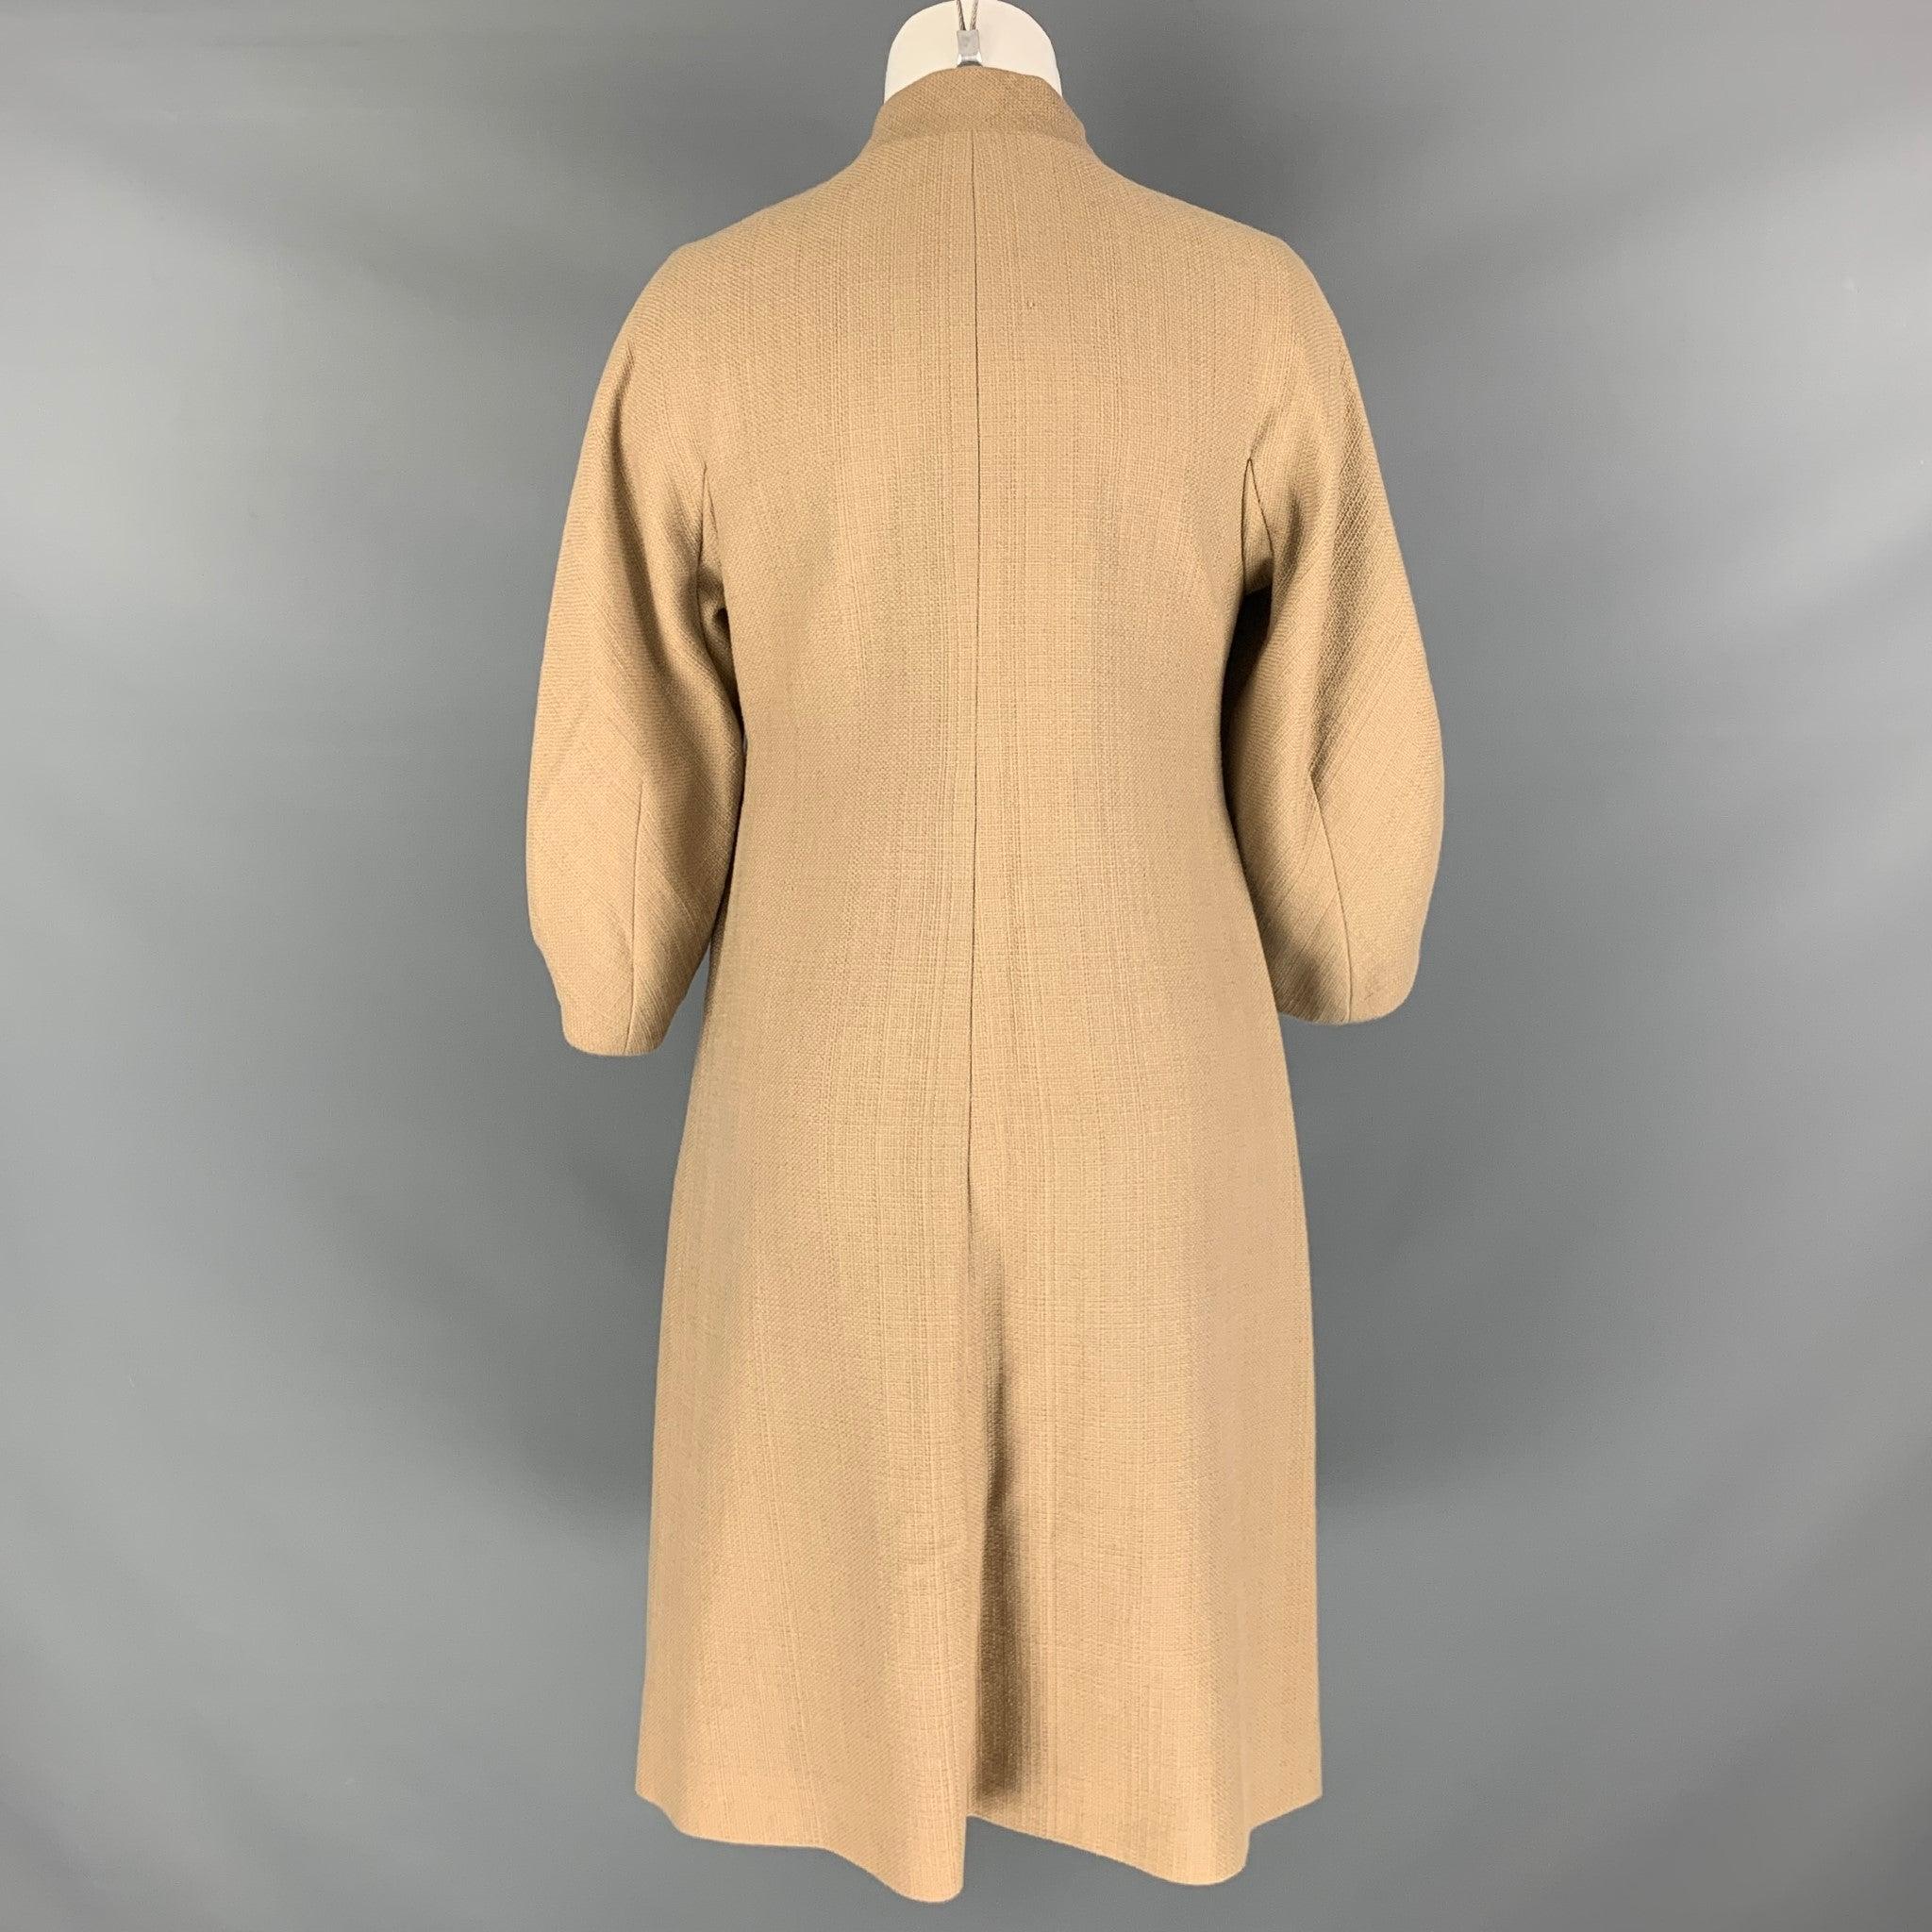 NICOLE FARHI Size 6 Beige Cotton 3/4 Sleeves Coat In Excellent Condition For Sale In San Francisco, CA